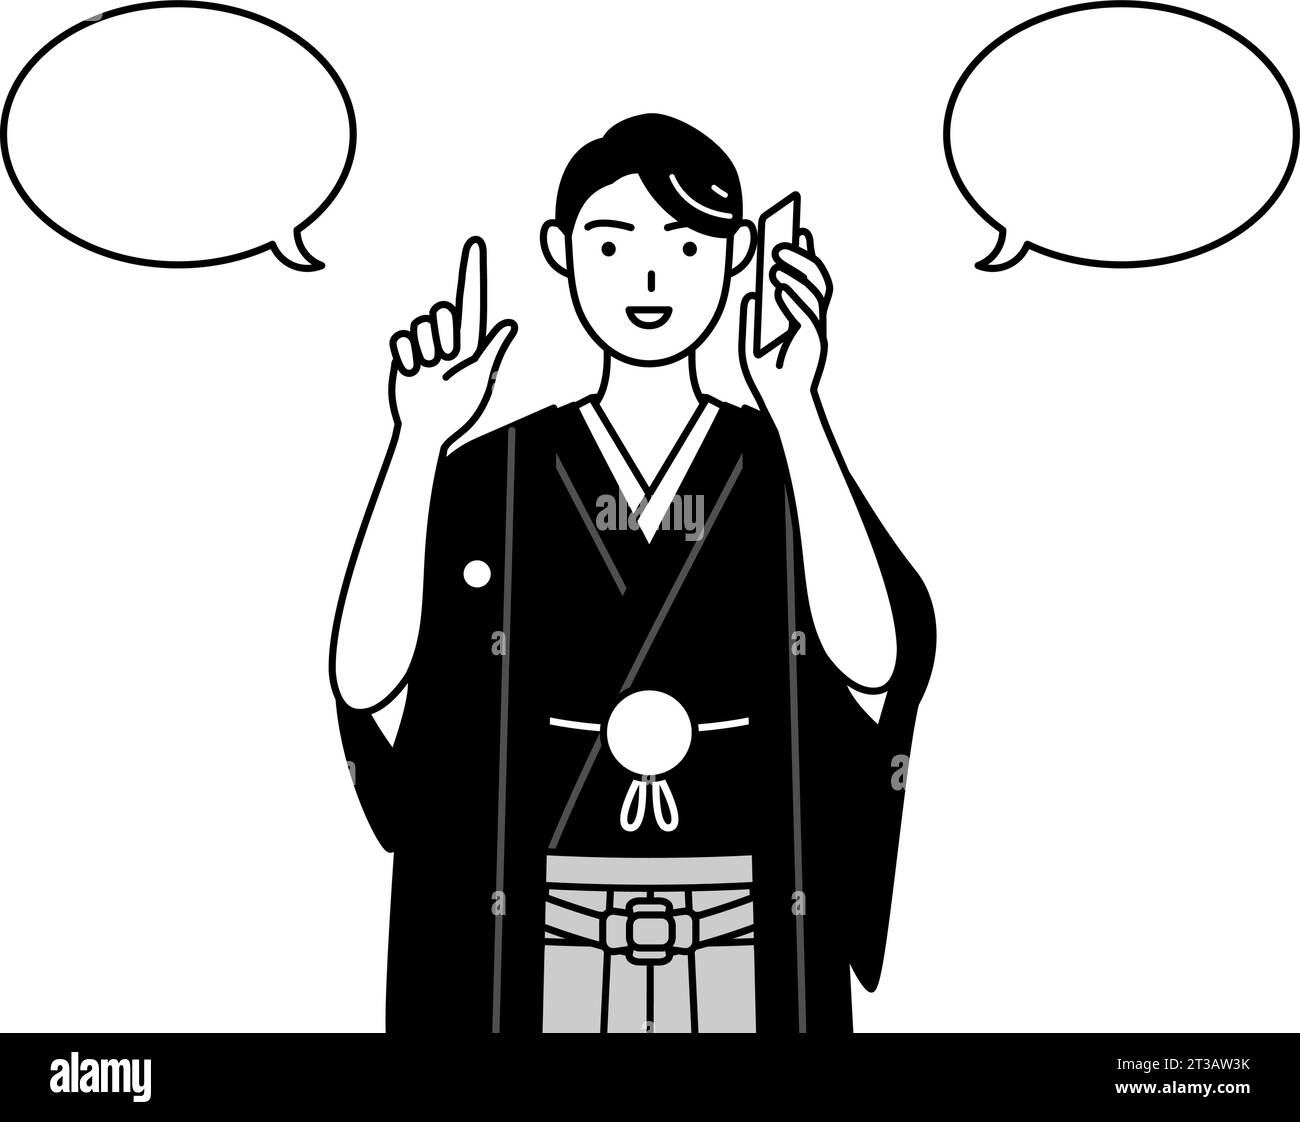 Man wearing Hakama with crest pointing while on the phone, Vector ...